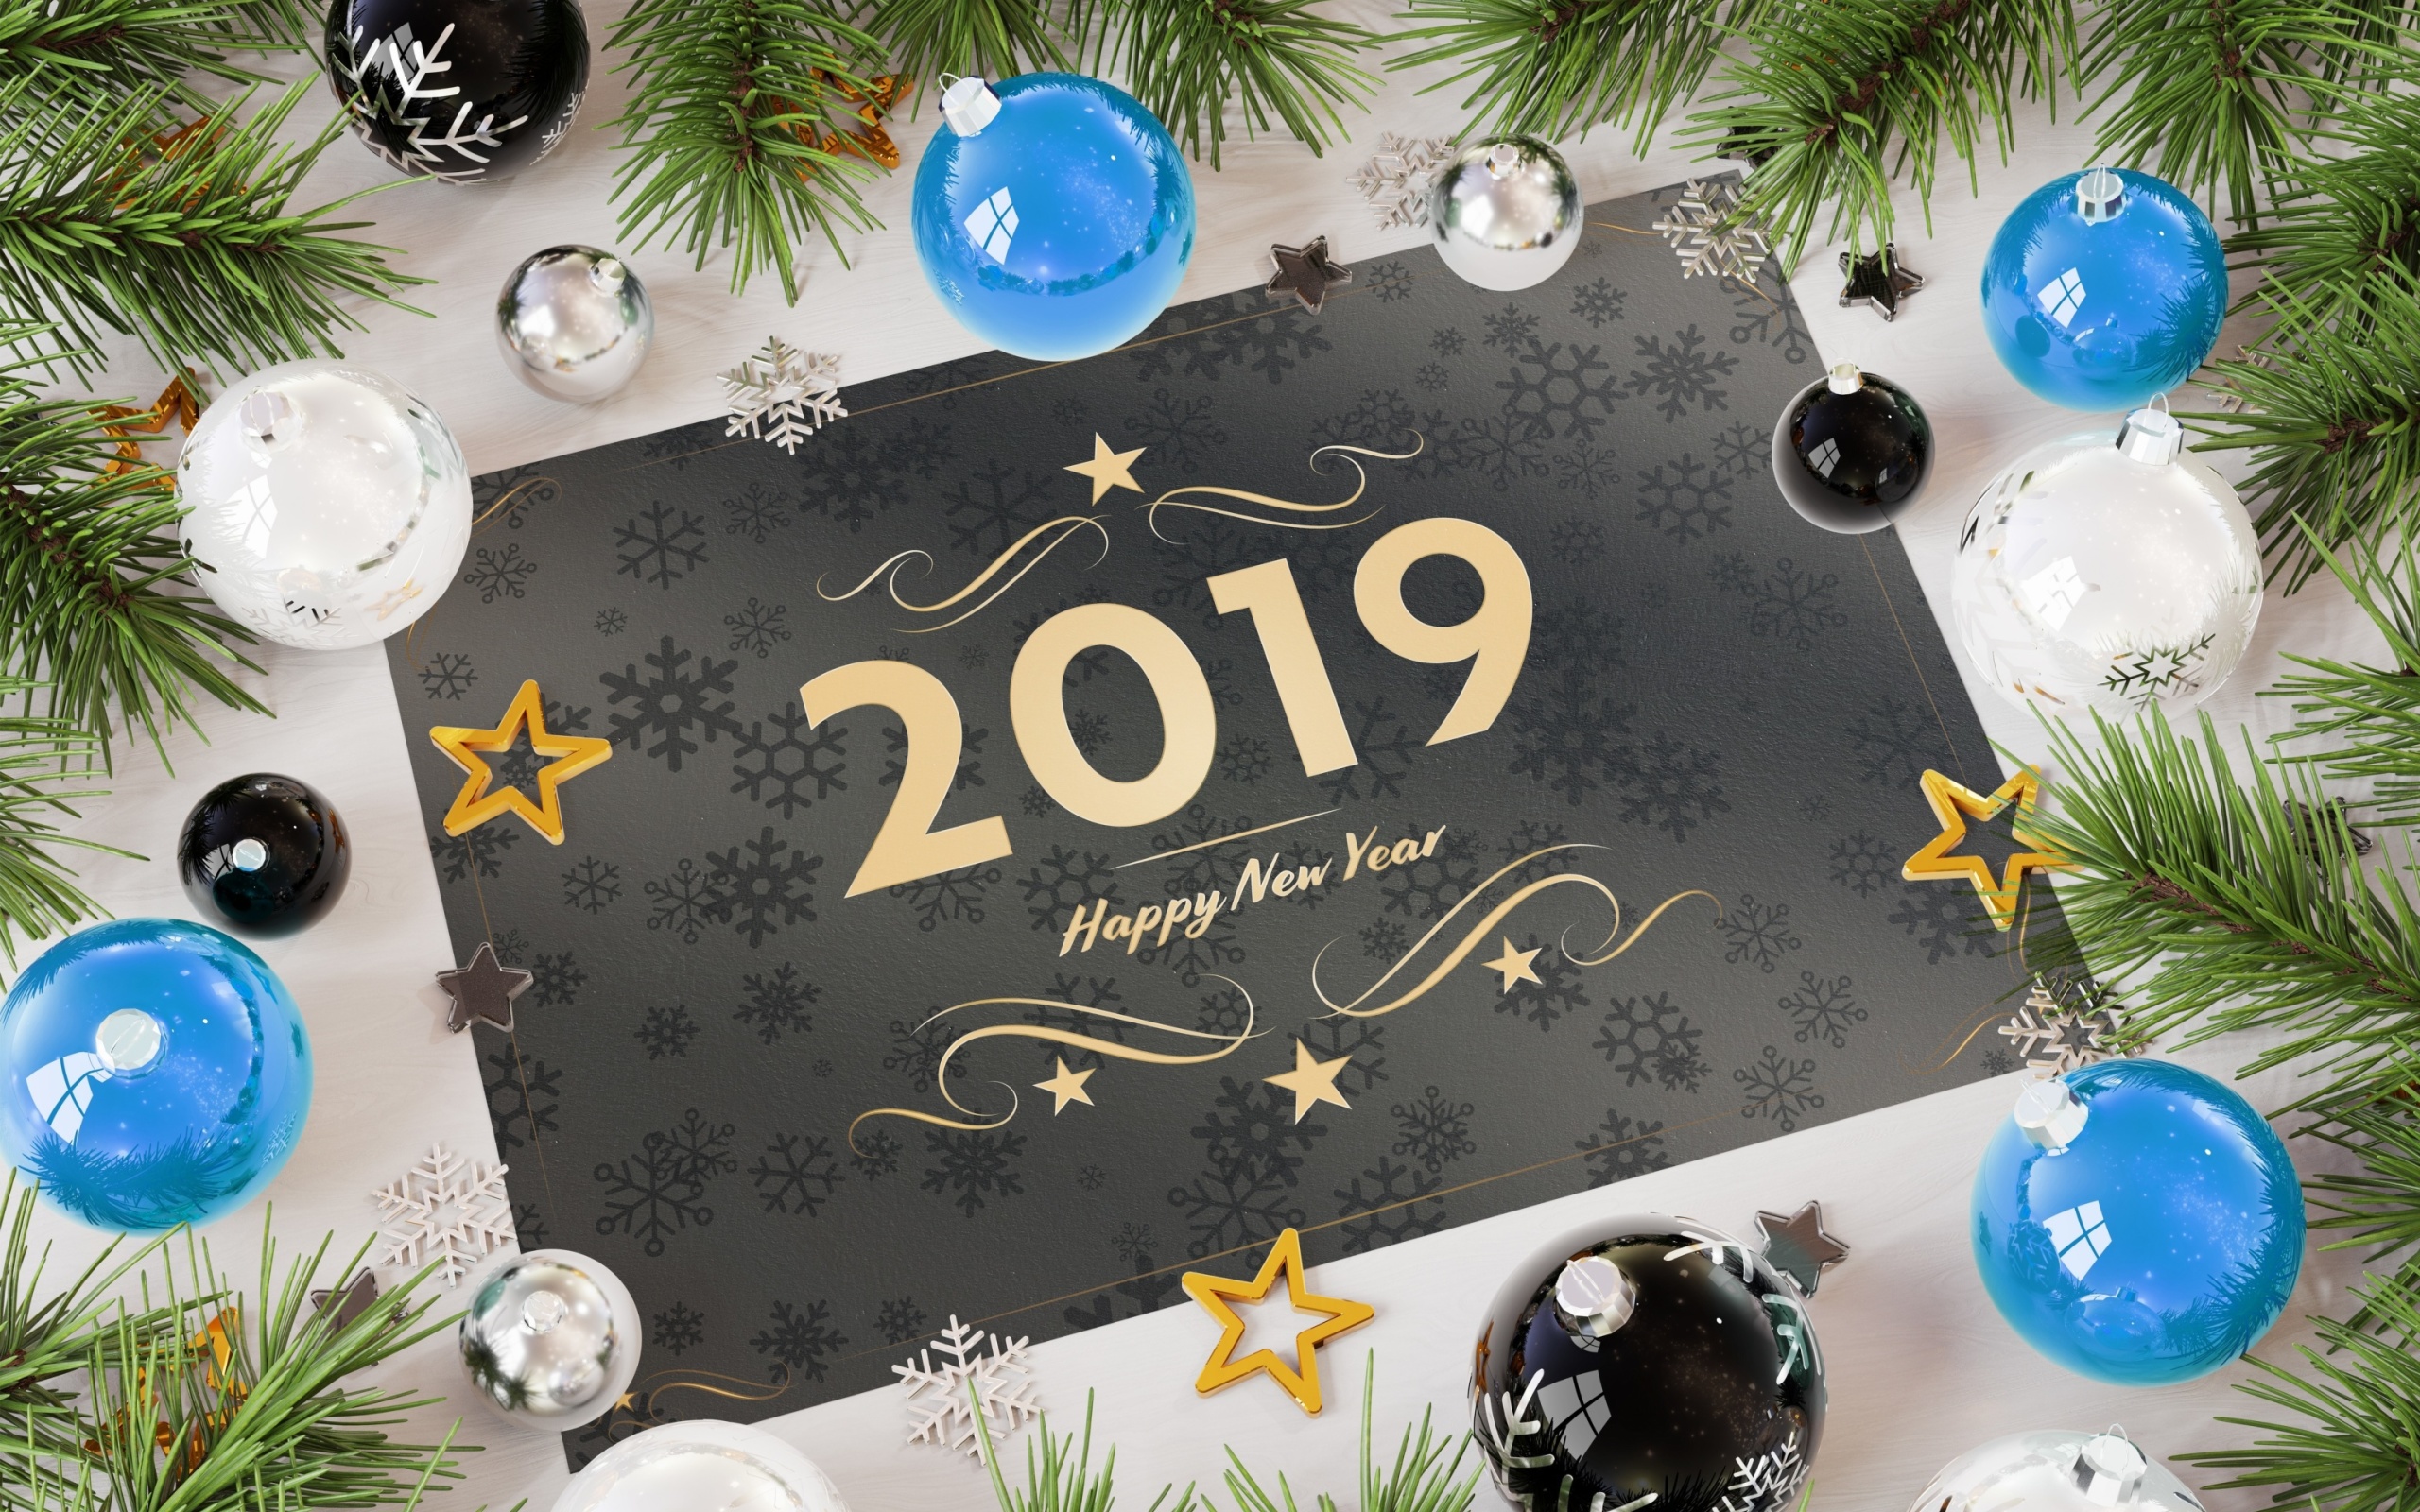 2019 Happy New Year Message wallpaper 2560x1600